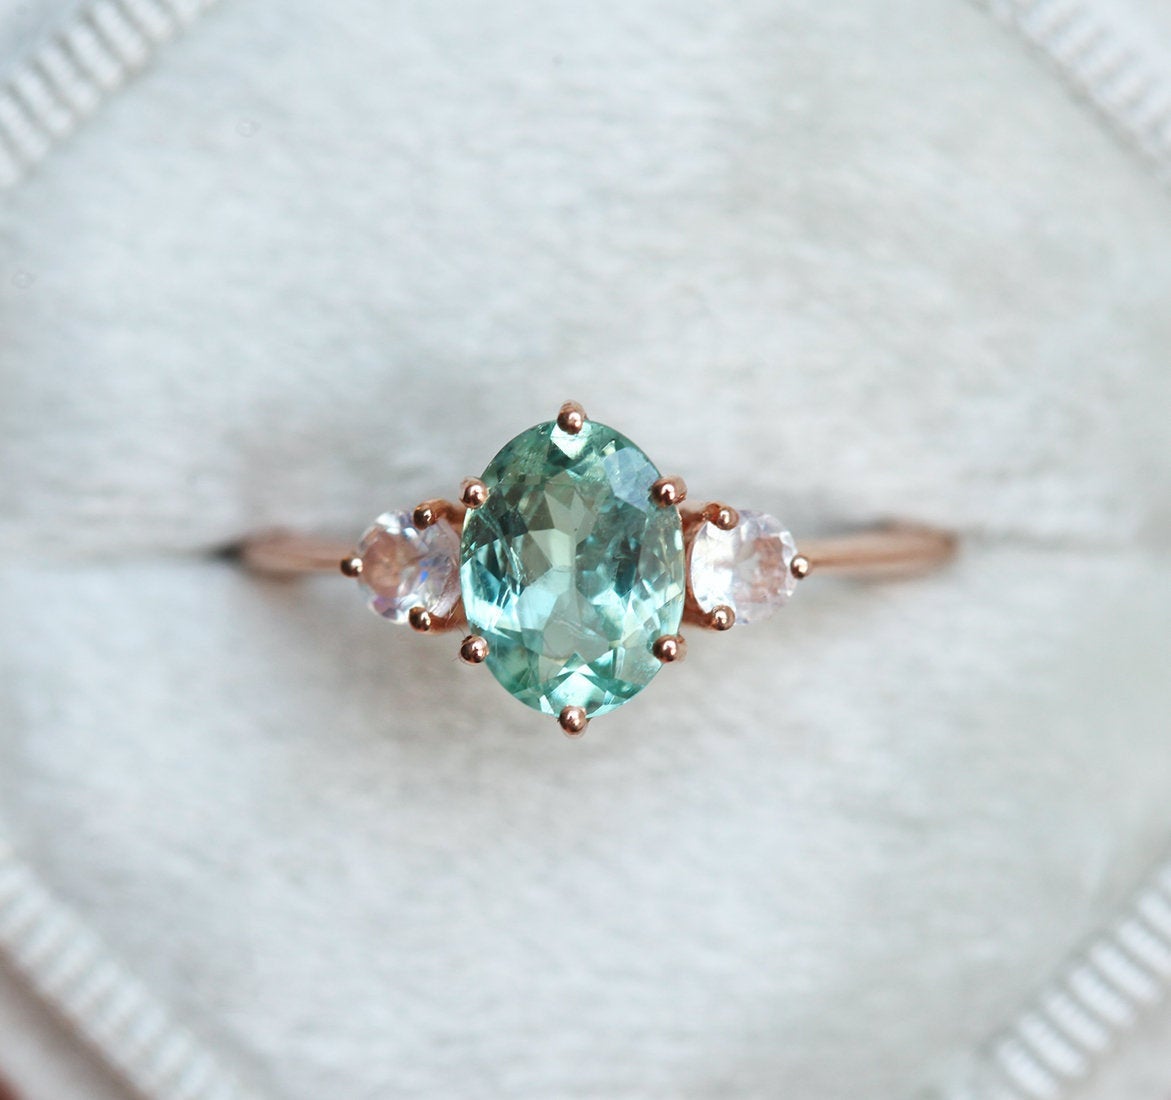 Mint Tourmaline Ring With 2 Side Moonstones